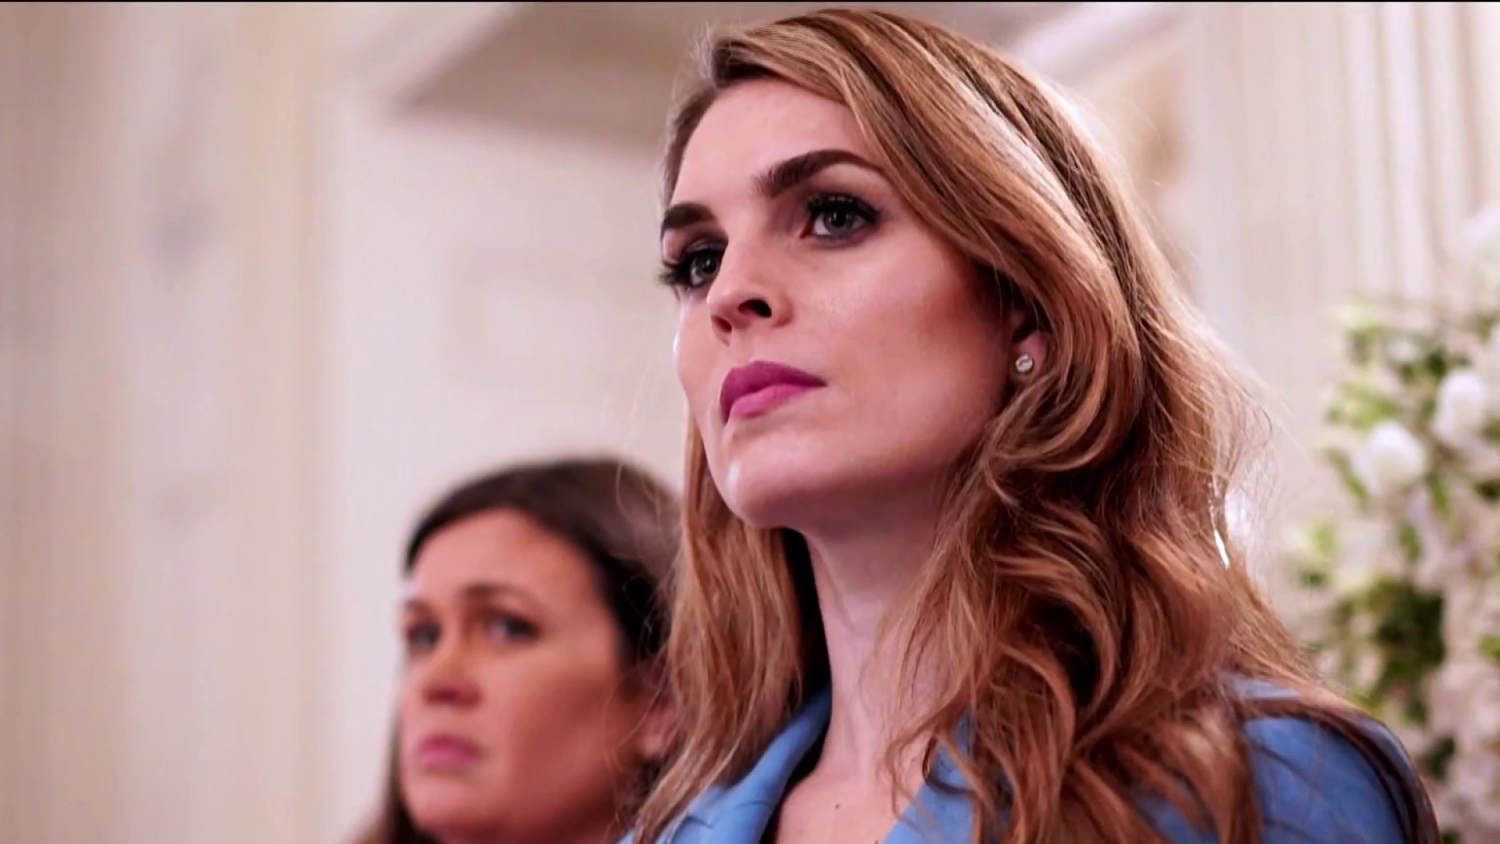 Hope Hicks testifies about learning of the 'Access Hollywood' tape